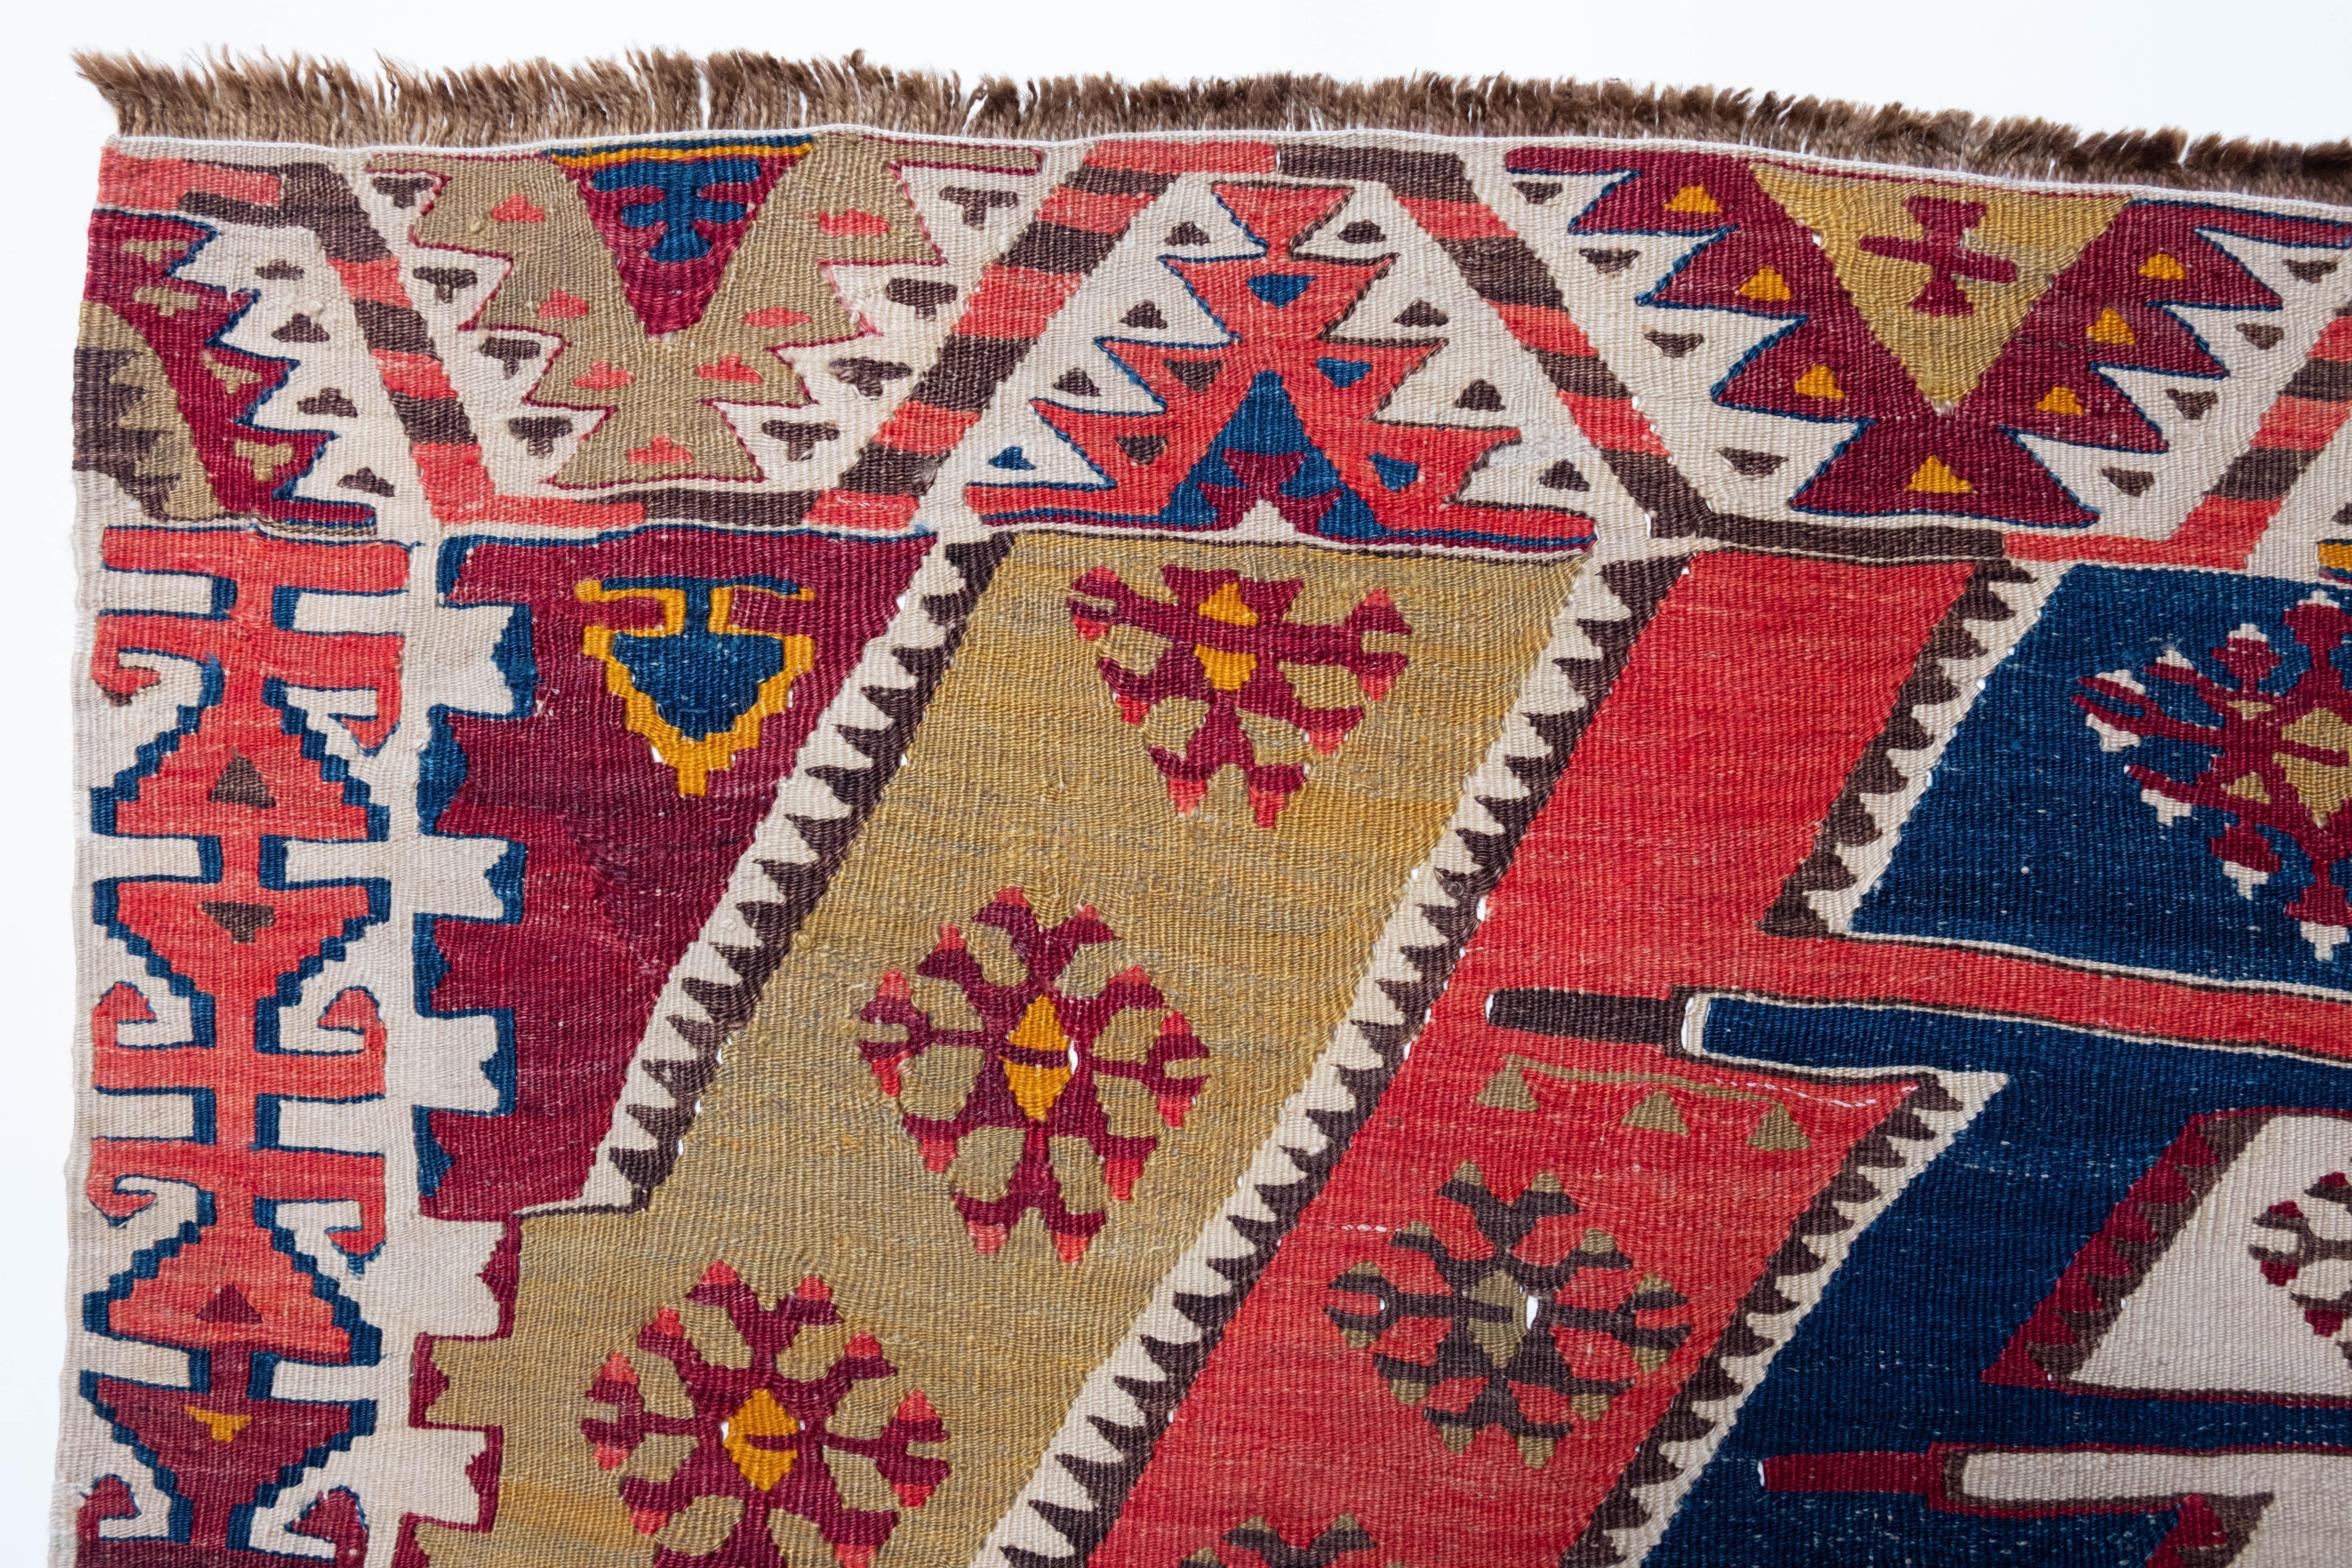 This is Eastern Anatolian Antique Kilim from the Rashwan, Malatya region with a rare and beautiful color composition.

This highly collectible antique kilim has wonderful special colors and textures that are typical of an old kilim in good